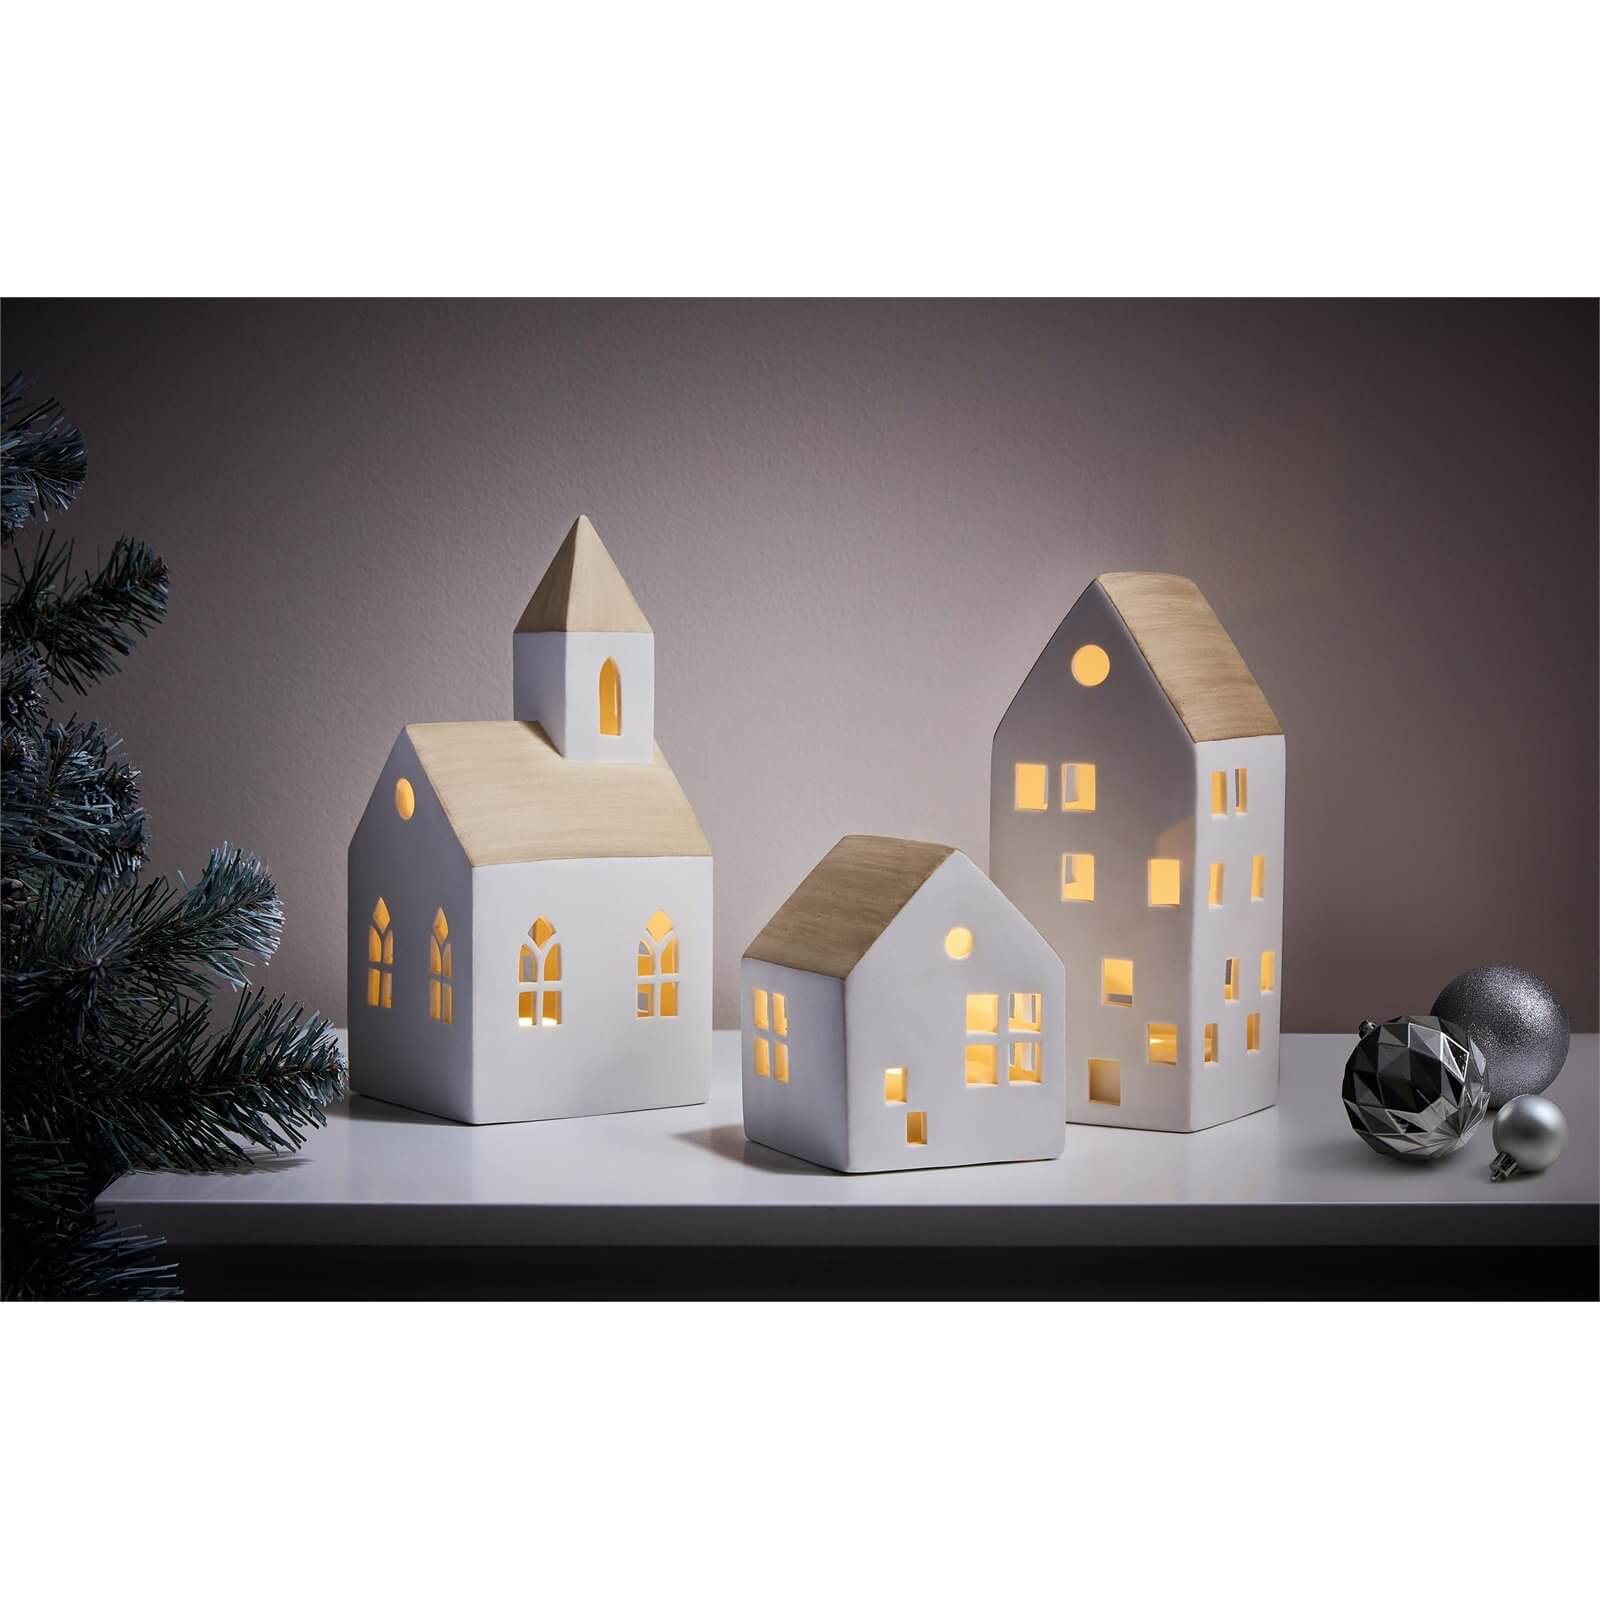 Porcelain Set of 3 Houses Light Up Decoration (Battery Operated)